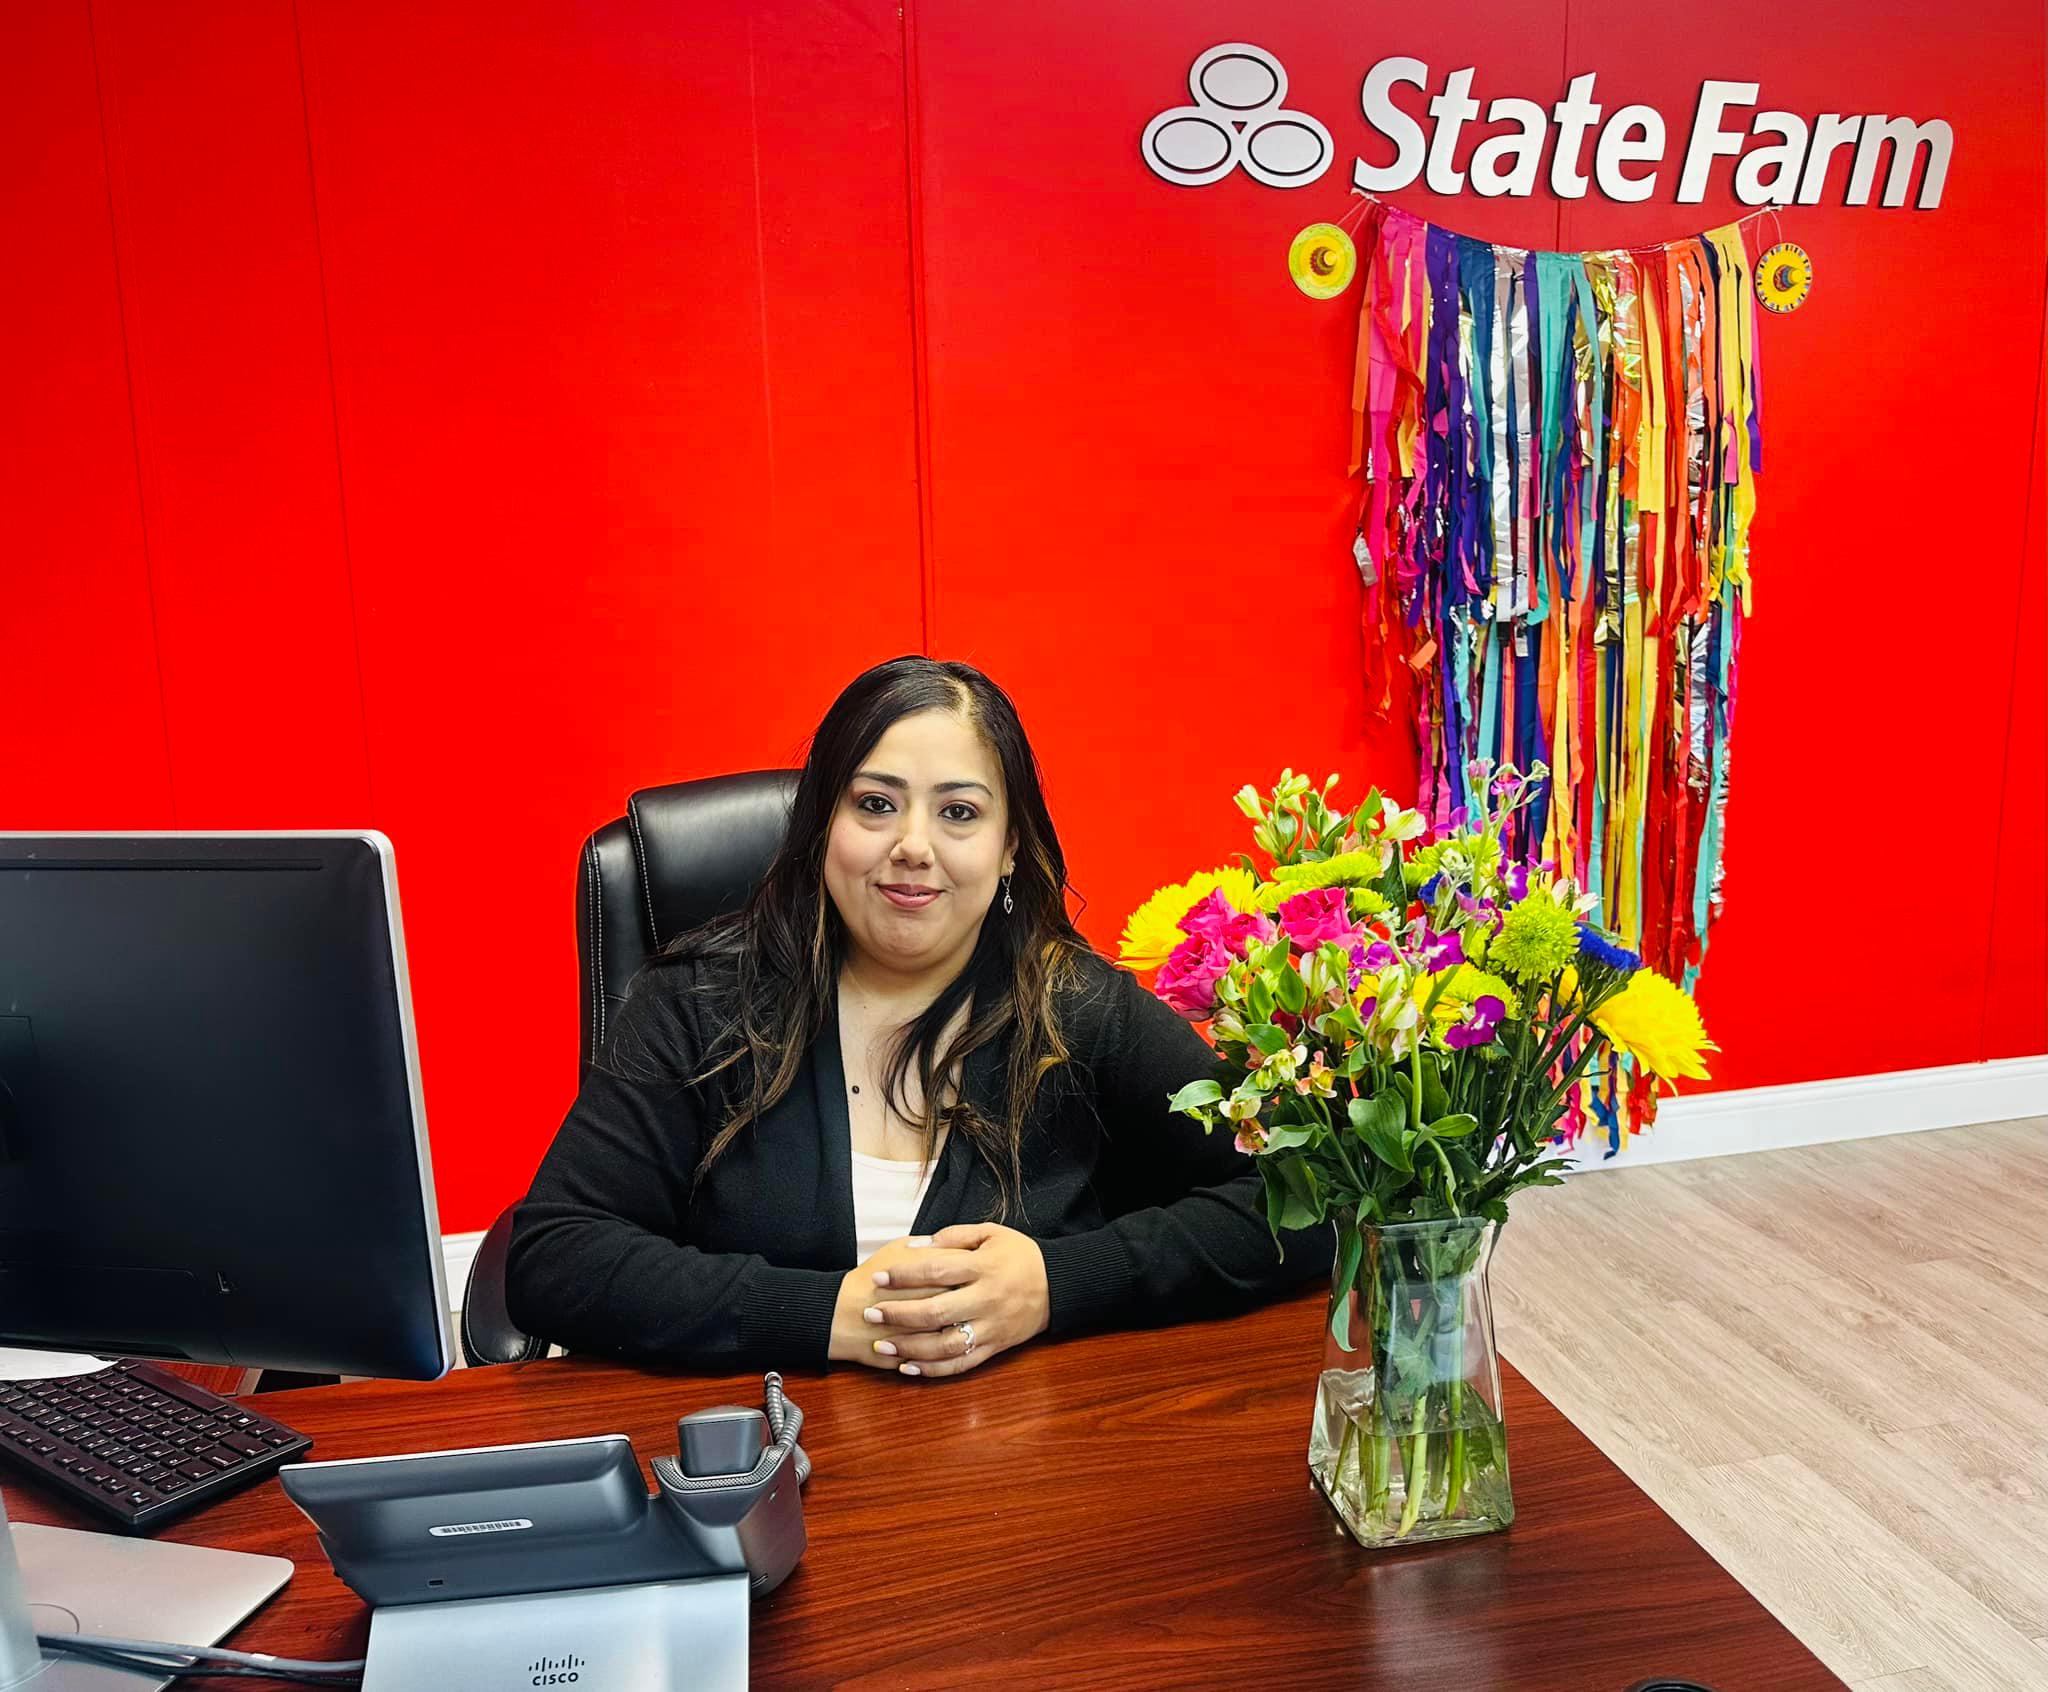 Congratulations to Mary on passing her state insurance exams. We are so proud of you 
Wishing you to Isabel Degollado - State Farm Insurance Agent San Antonio (210)438-5826